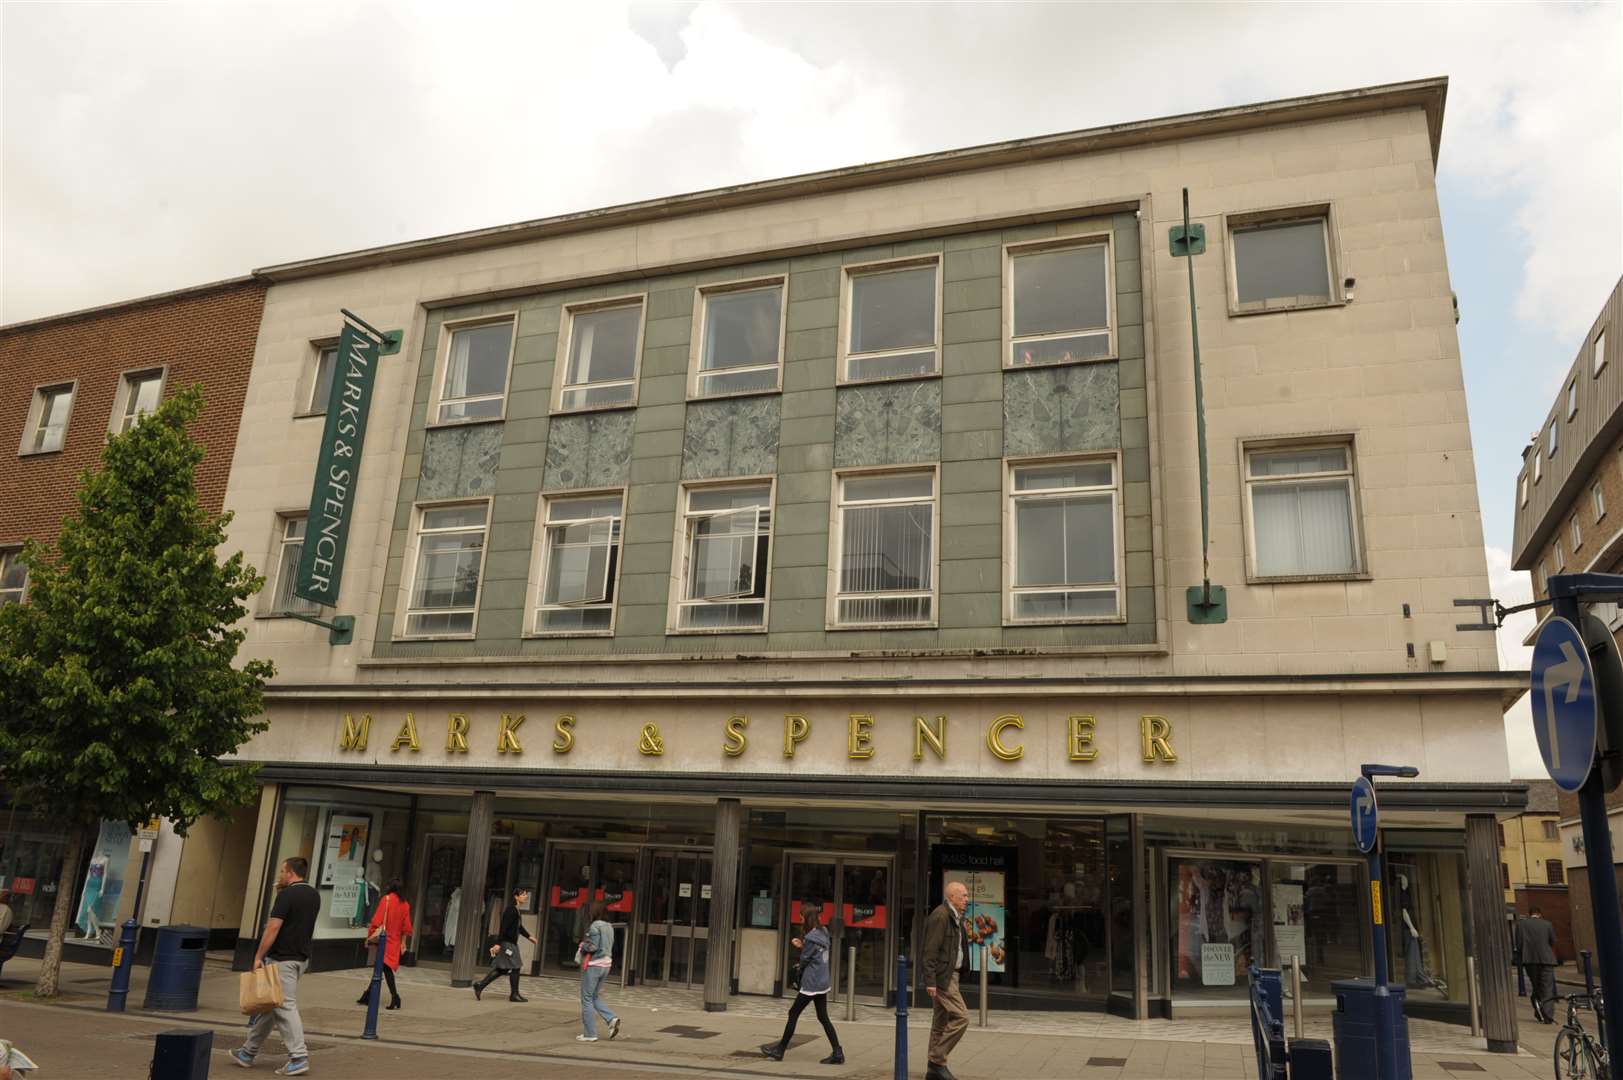 Marks and Spencer in Gravesend before it closed